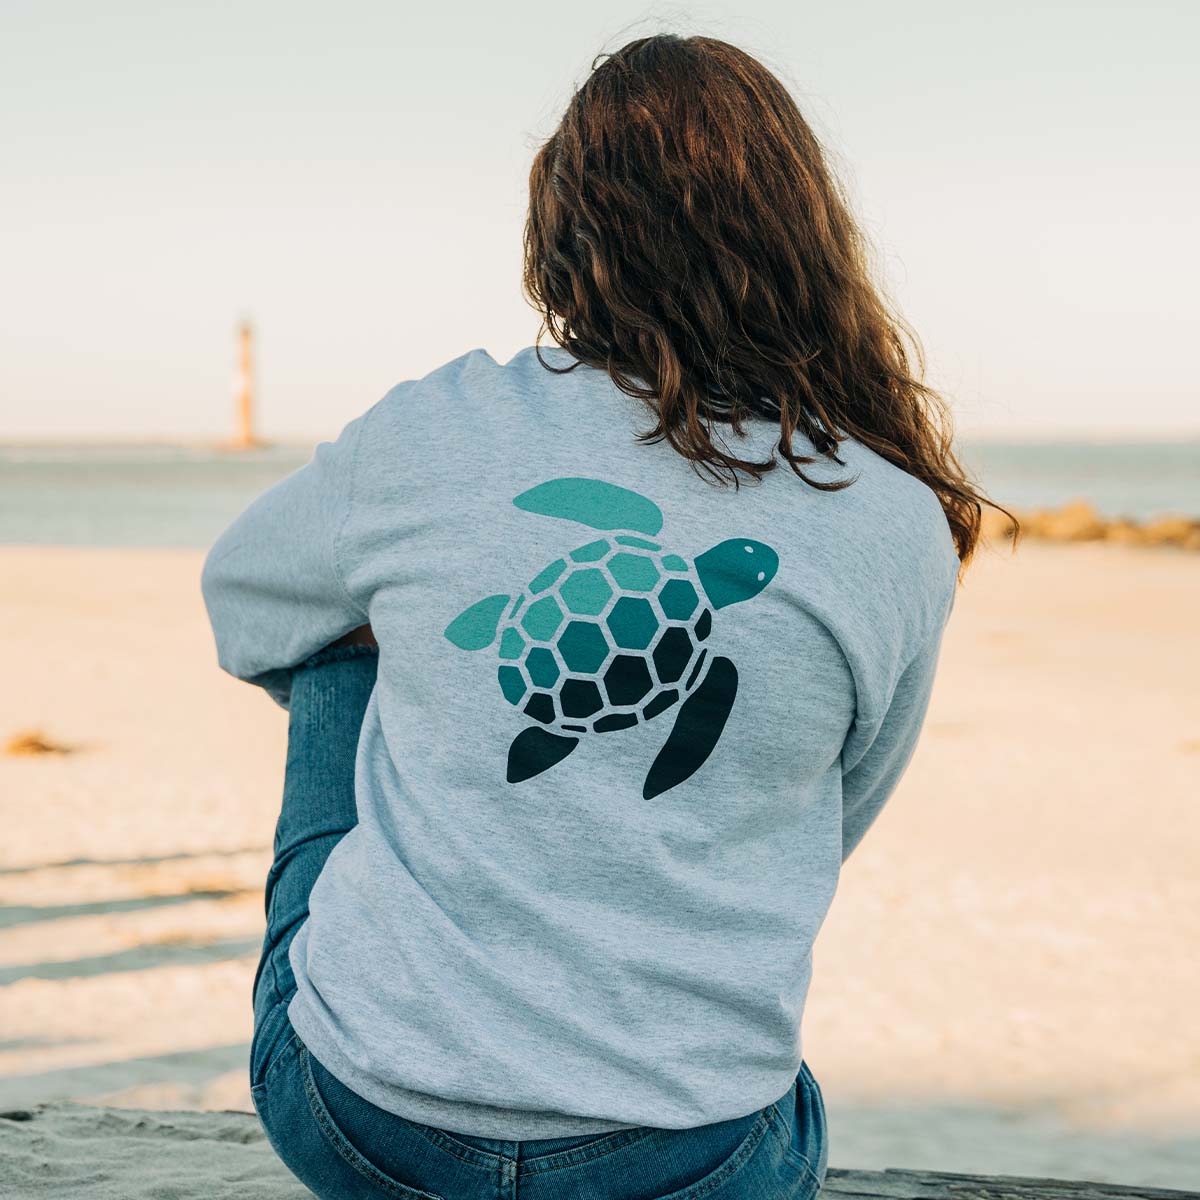 Soft Ash crew neck sweatshirt with Sea Green Apparel navy rectangle logo on front center and blue gradient Sea Green Apparel turtle logo on center back 8-ounce, 50/50 cotton/poly Double-needle stitching at waistband and cuffs 1x1 rib knit collar, cuffs and waistband with spandex